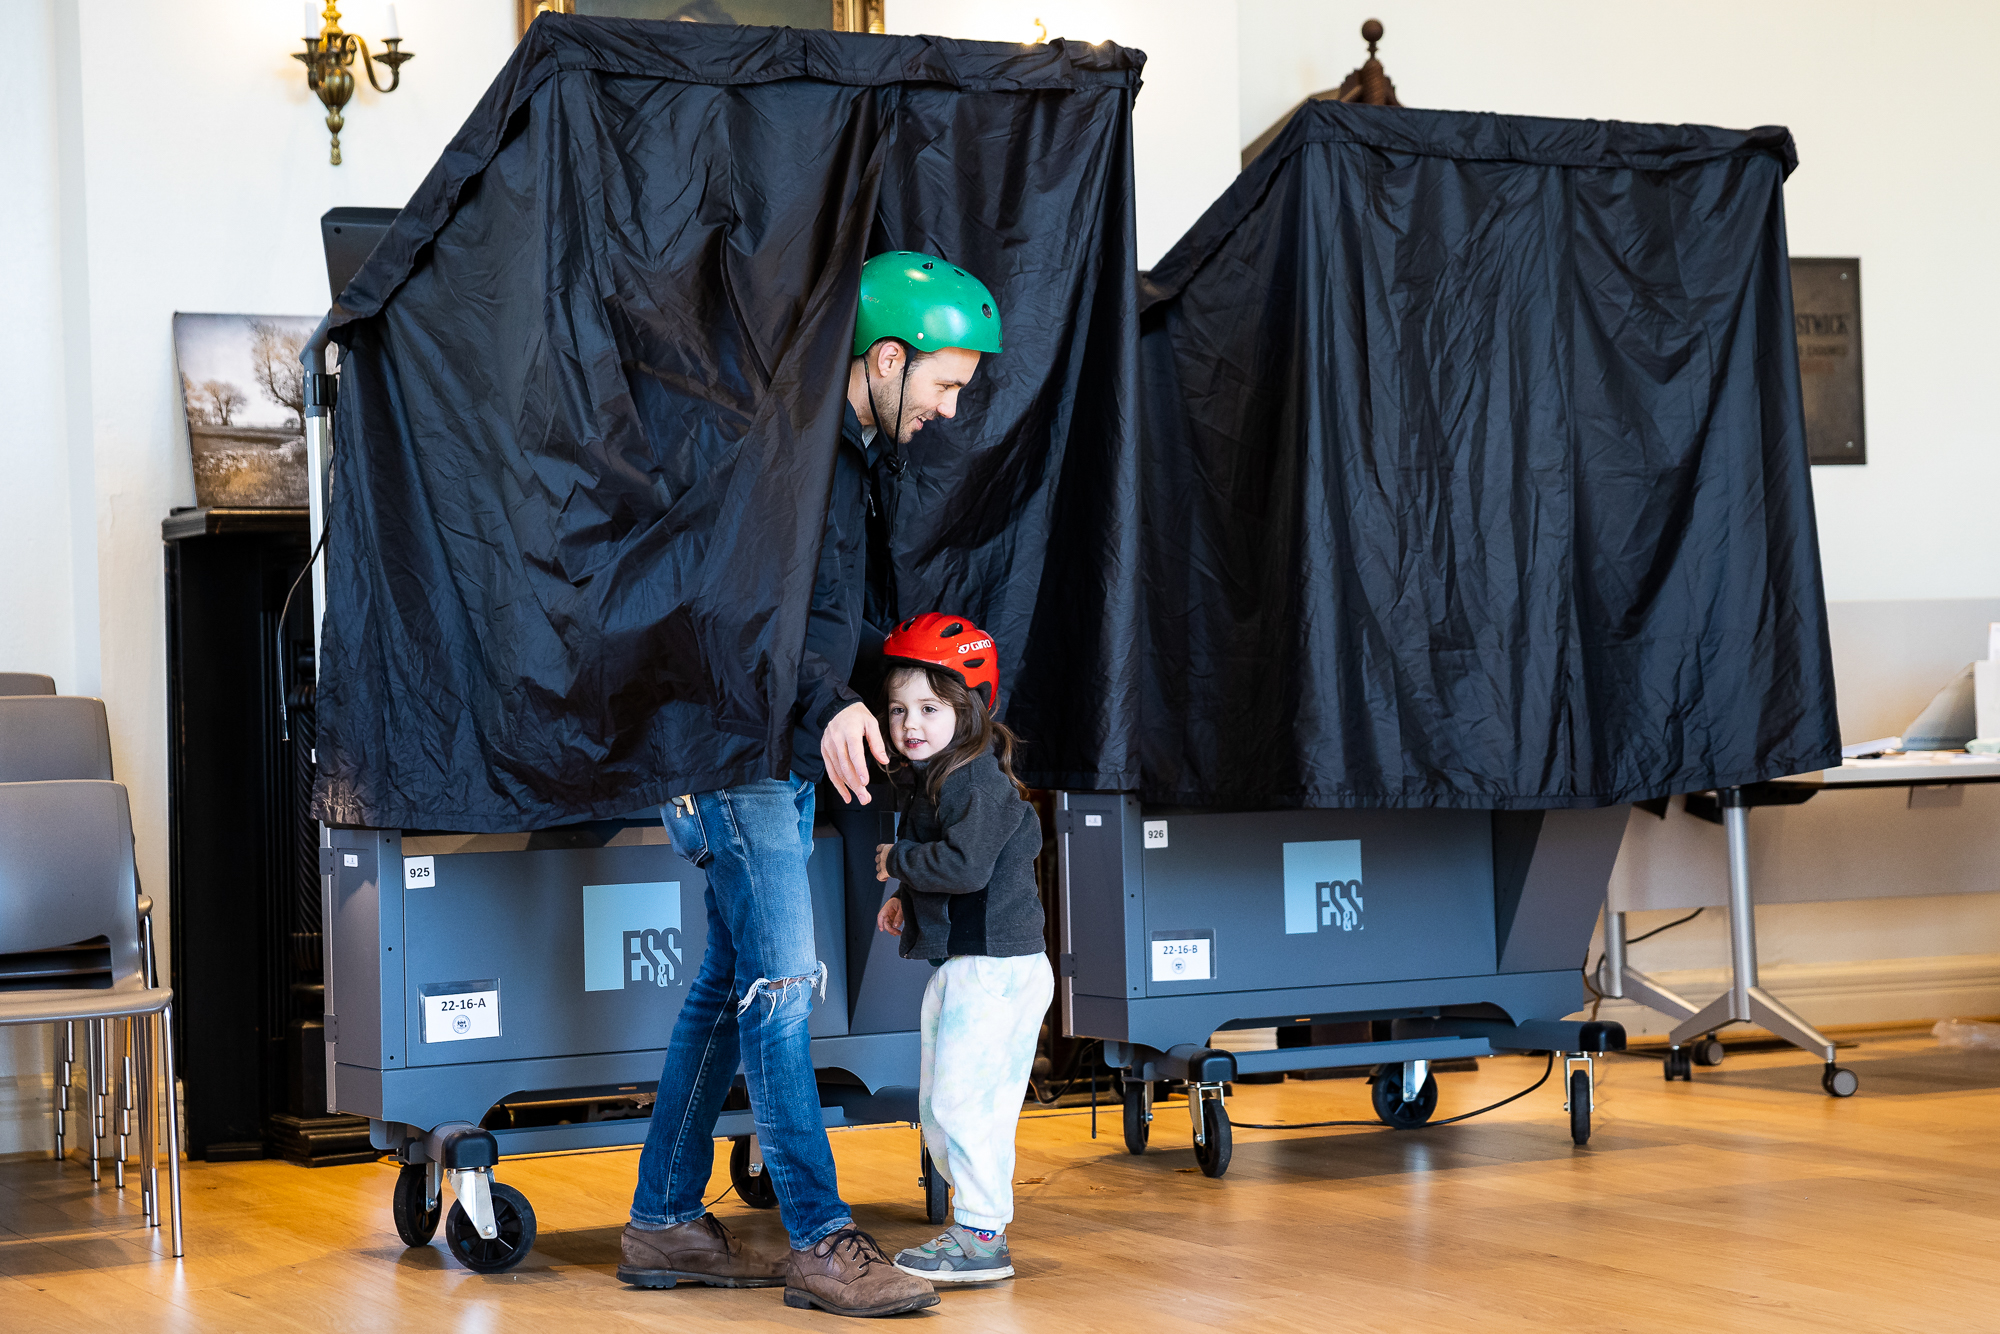 Michael Pechter and his daughter Naomi Pechter, 3, emerge from a voting booth.